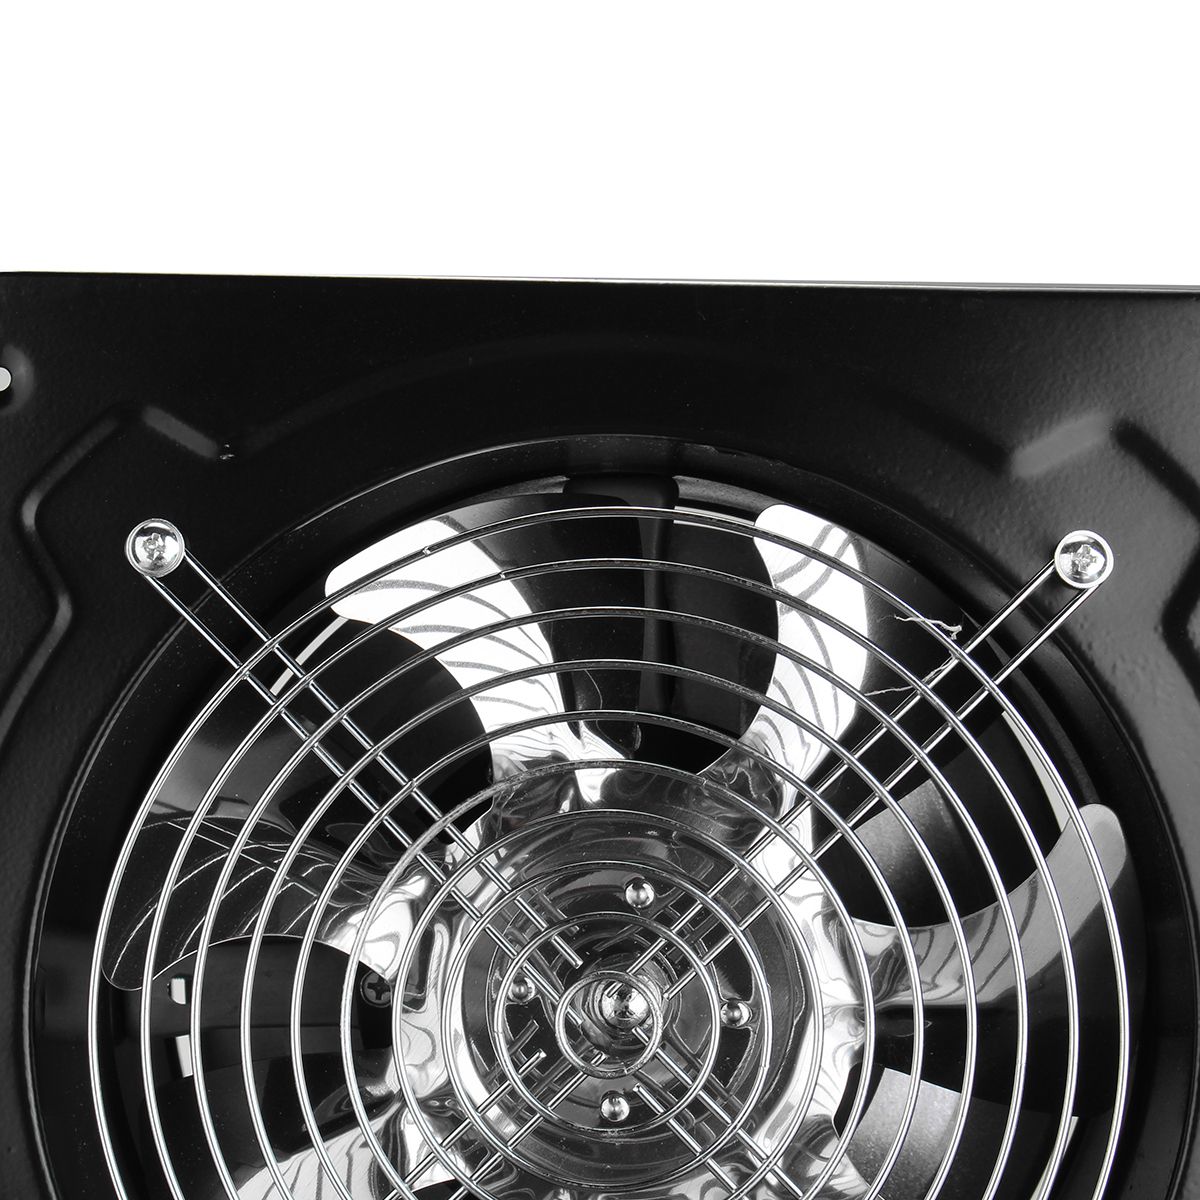 60W80W150W-Industrial-Ventilation-Extractor-Axial-Exhaust-Commercial-Air-Blower-Fan-1338760